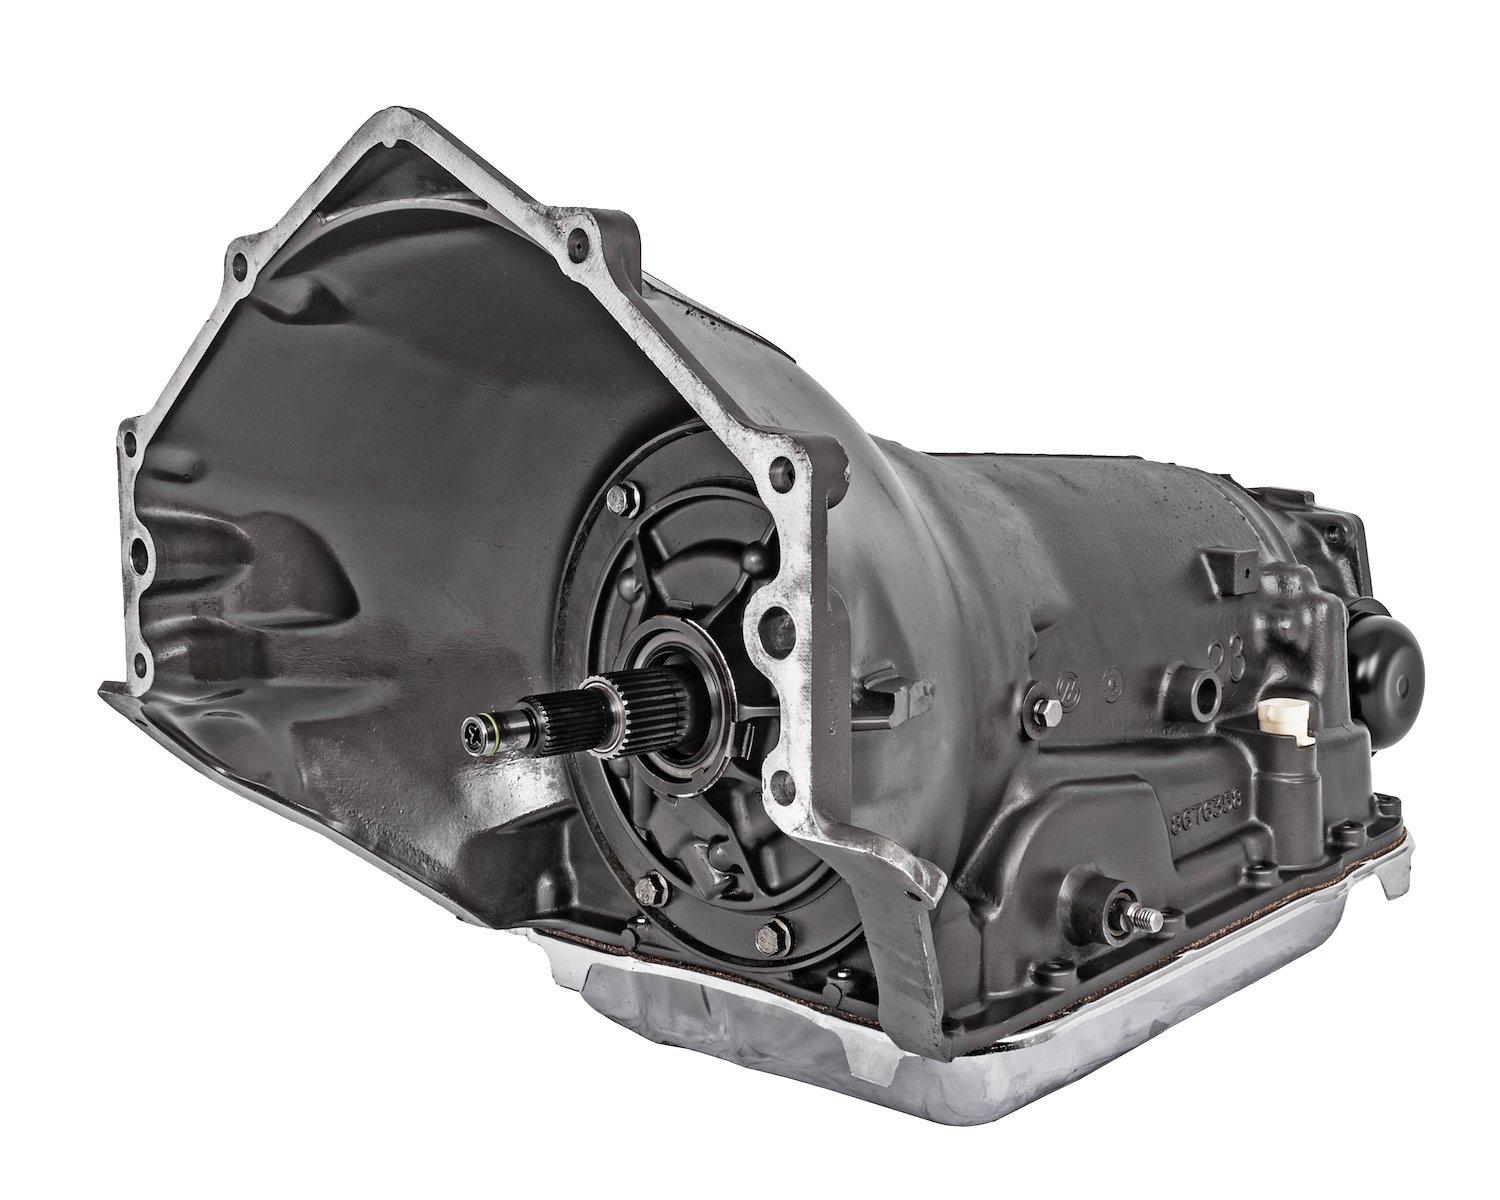 GM 700R4 Performance Automatic Transmission for Chevrolet 4WD [Rated up to 550 HP]